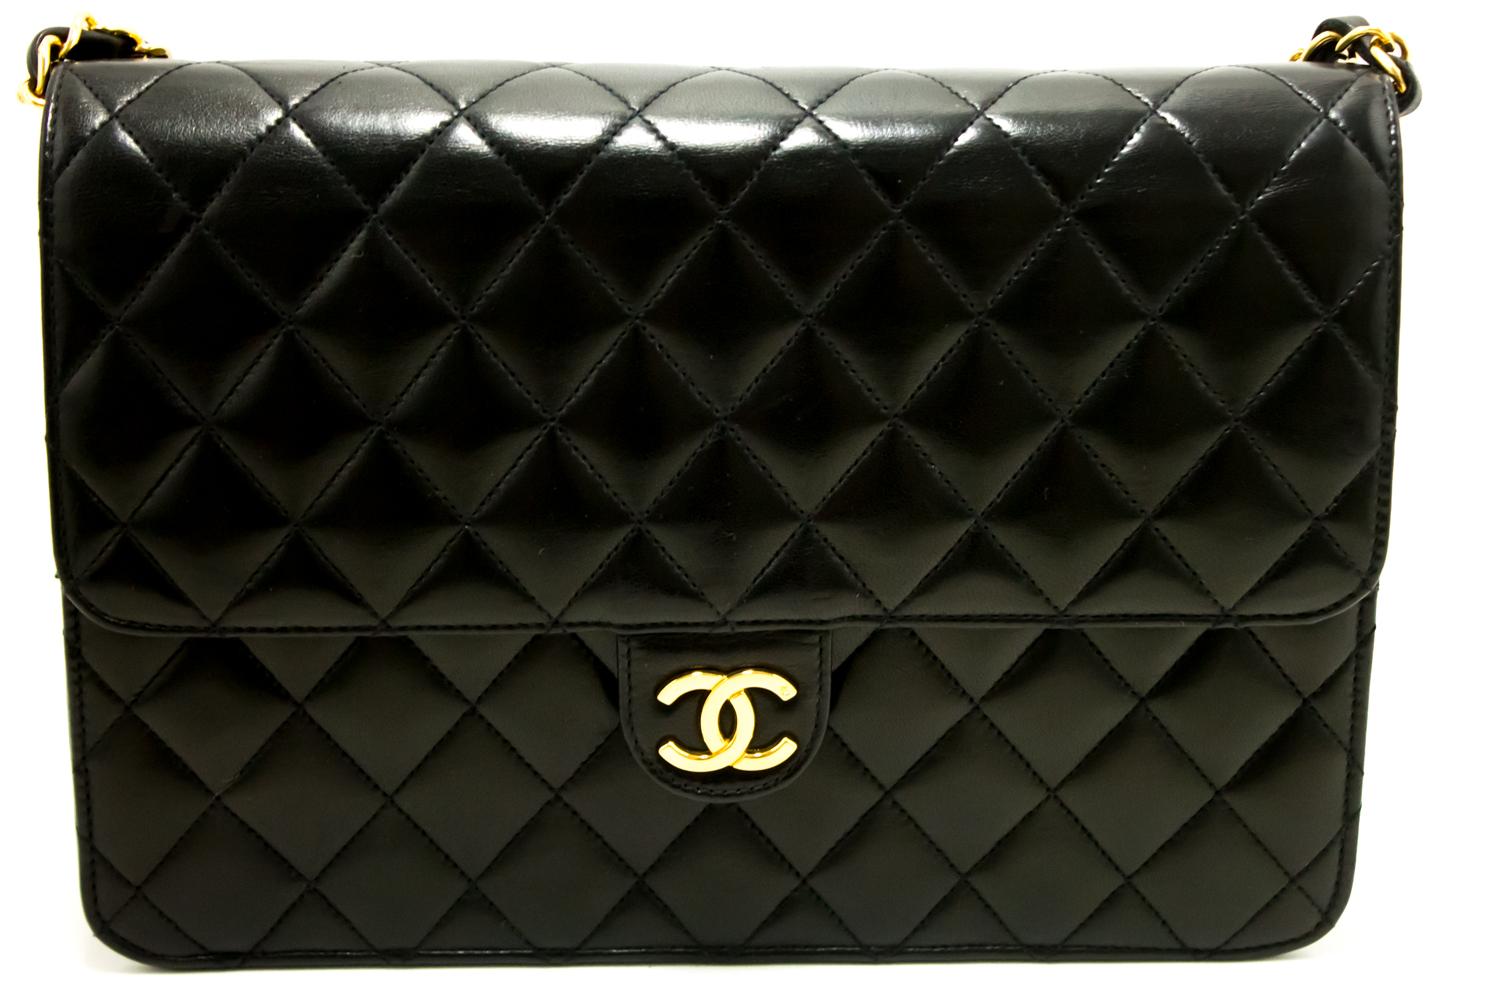 An authentic CHANEL Chain Shoulder Bag Clutch Black Quilted Flap made of black Lambskin. The color is Black. The outside material is Leather. The pattern is Solid.
Conditions & Ratings
Outside material: Lambskin
Color: Black
Closure: Push